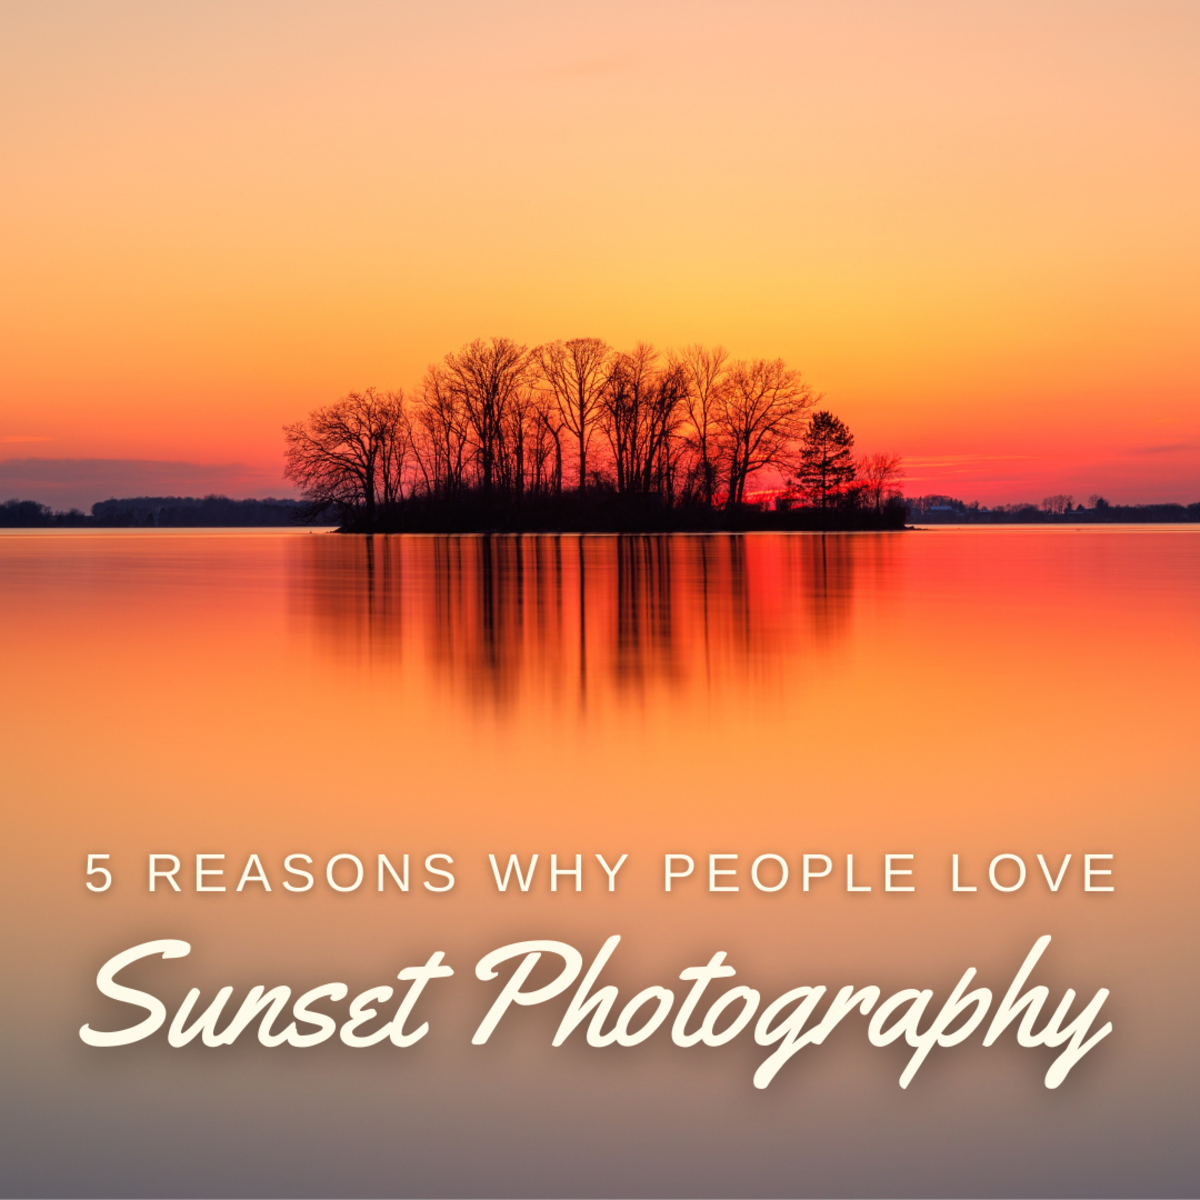 Sunset Photography Hd Wallpapers